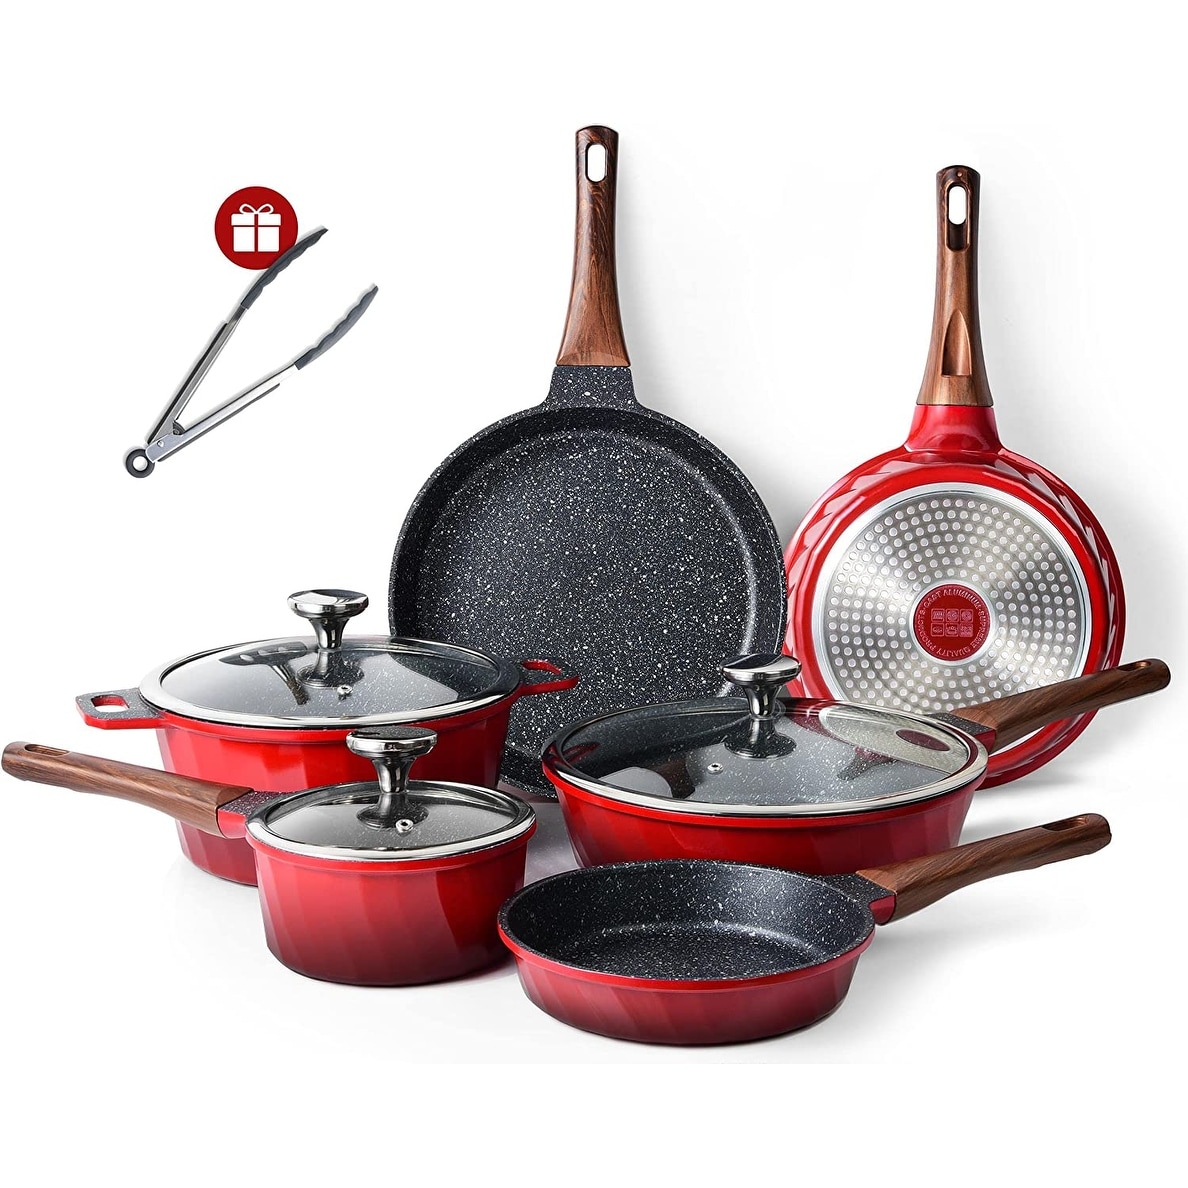 https://ak1.ostkcdn.com/images/products/is/images/direct/be2cc939e43f79c381bc21cac374dbac5af6686c/Induction-Pots-and-Pans-Set-Non-stick-Granite-Kitchen-Cookware-Sets-Nonstick-Kitchenware-Pans-for-Cooking-Pot-and-Pan-Set.jpg